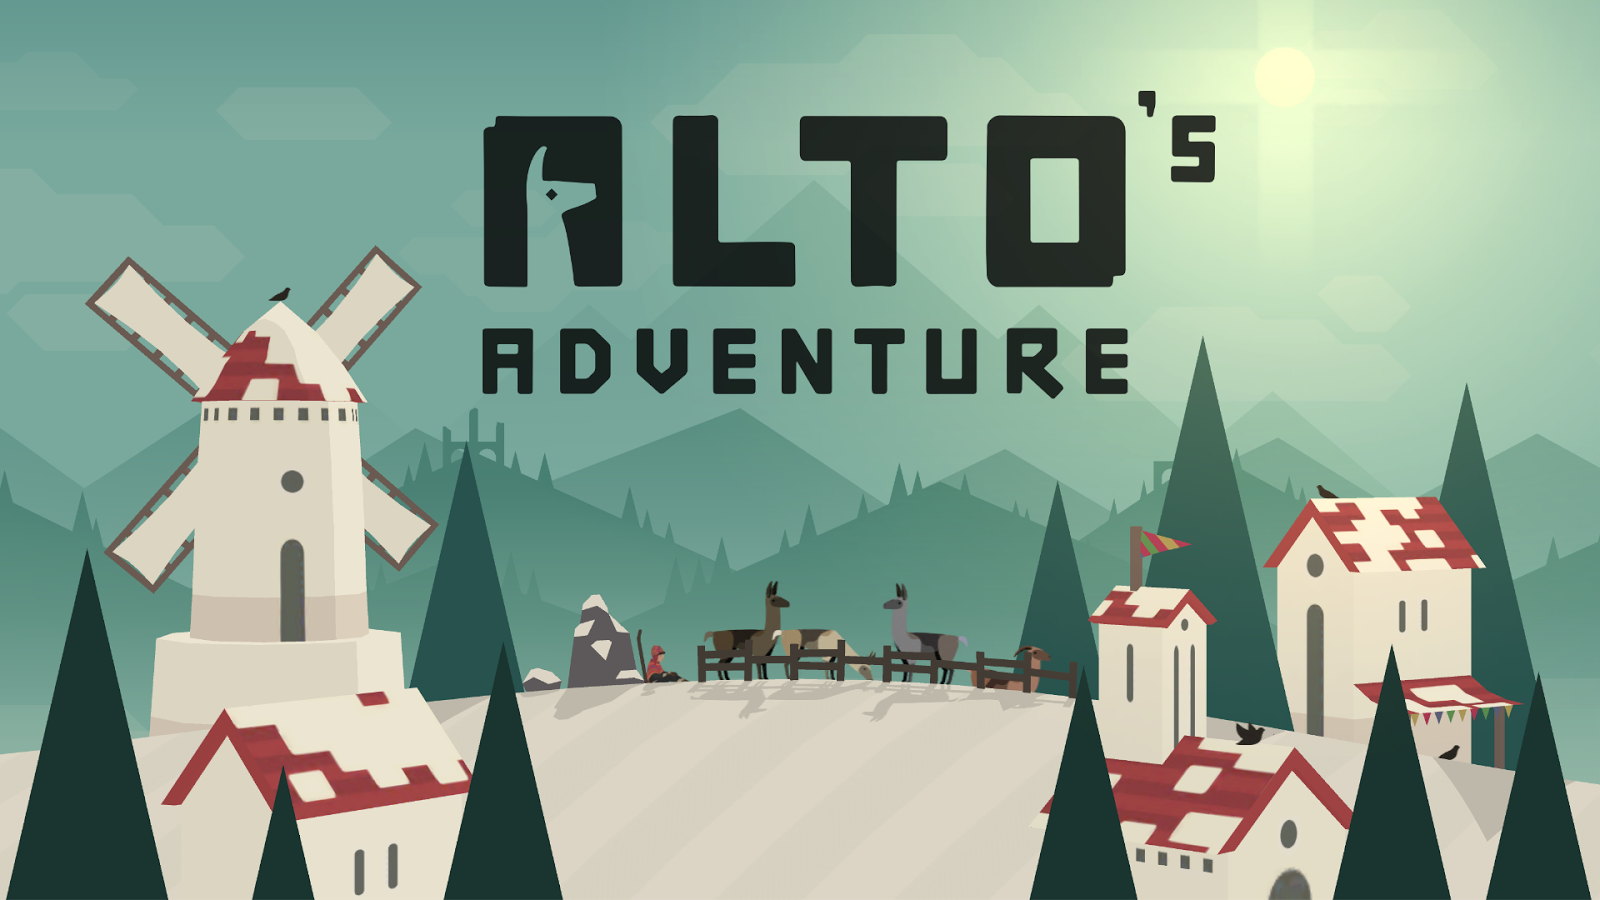 Alto's Adventure will be free on Android, coming February 11